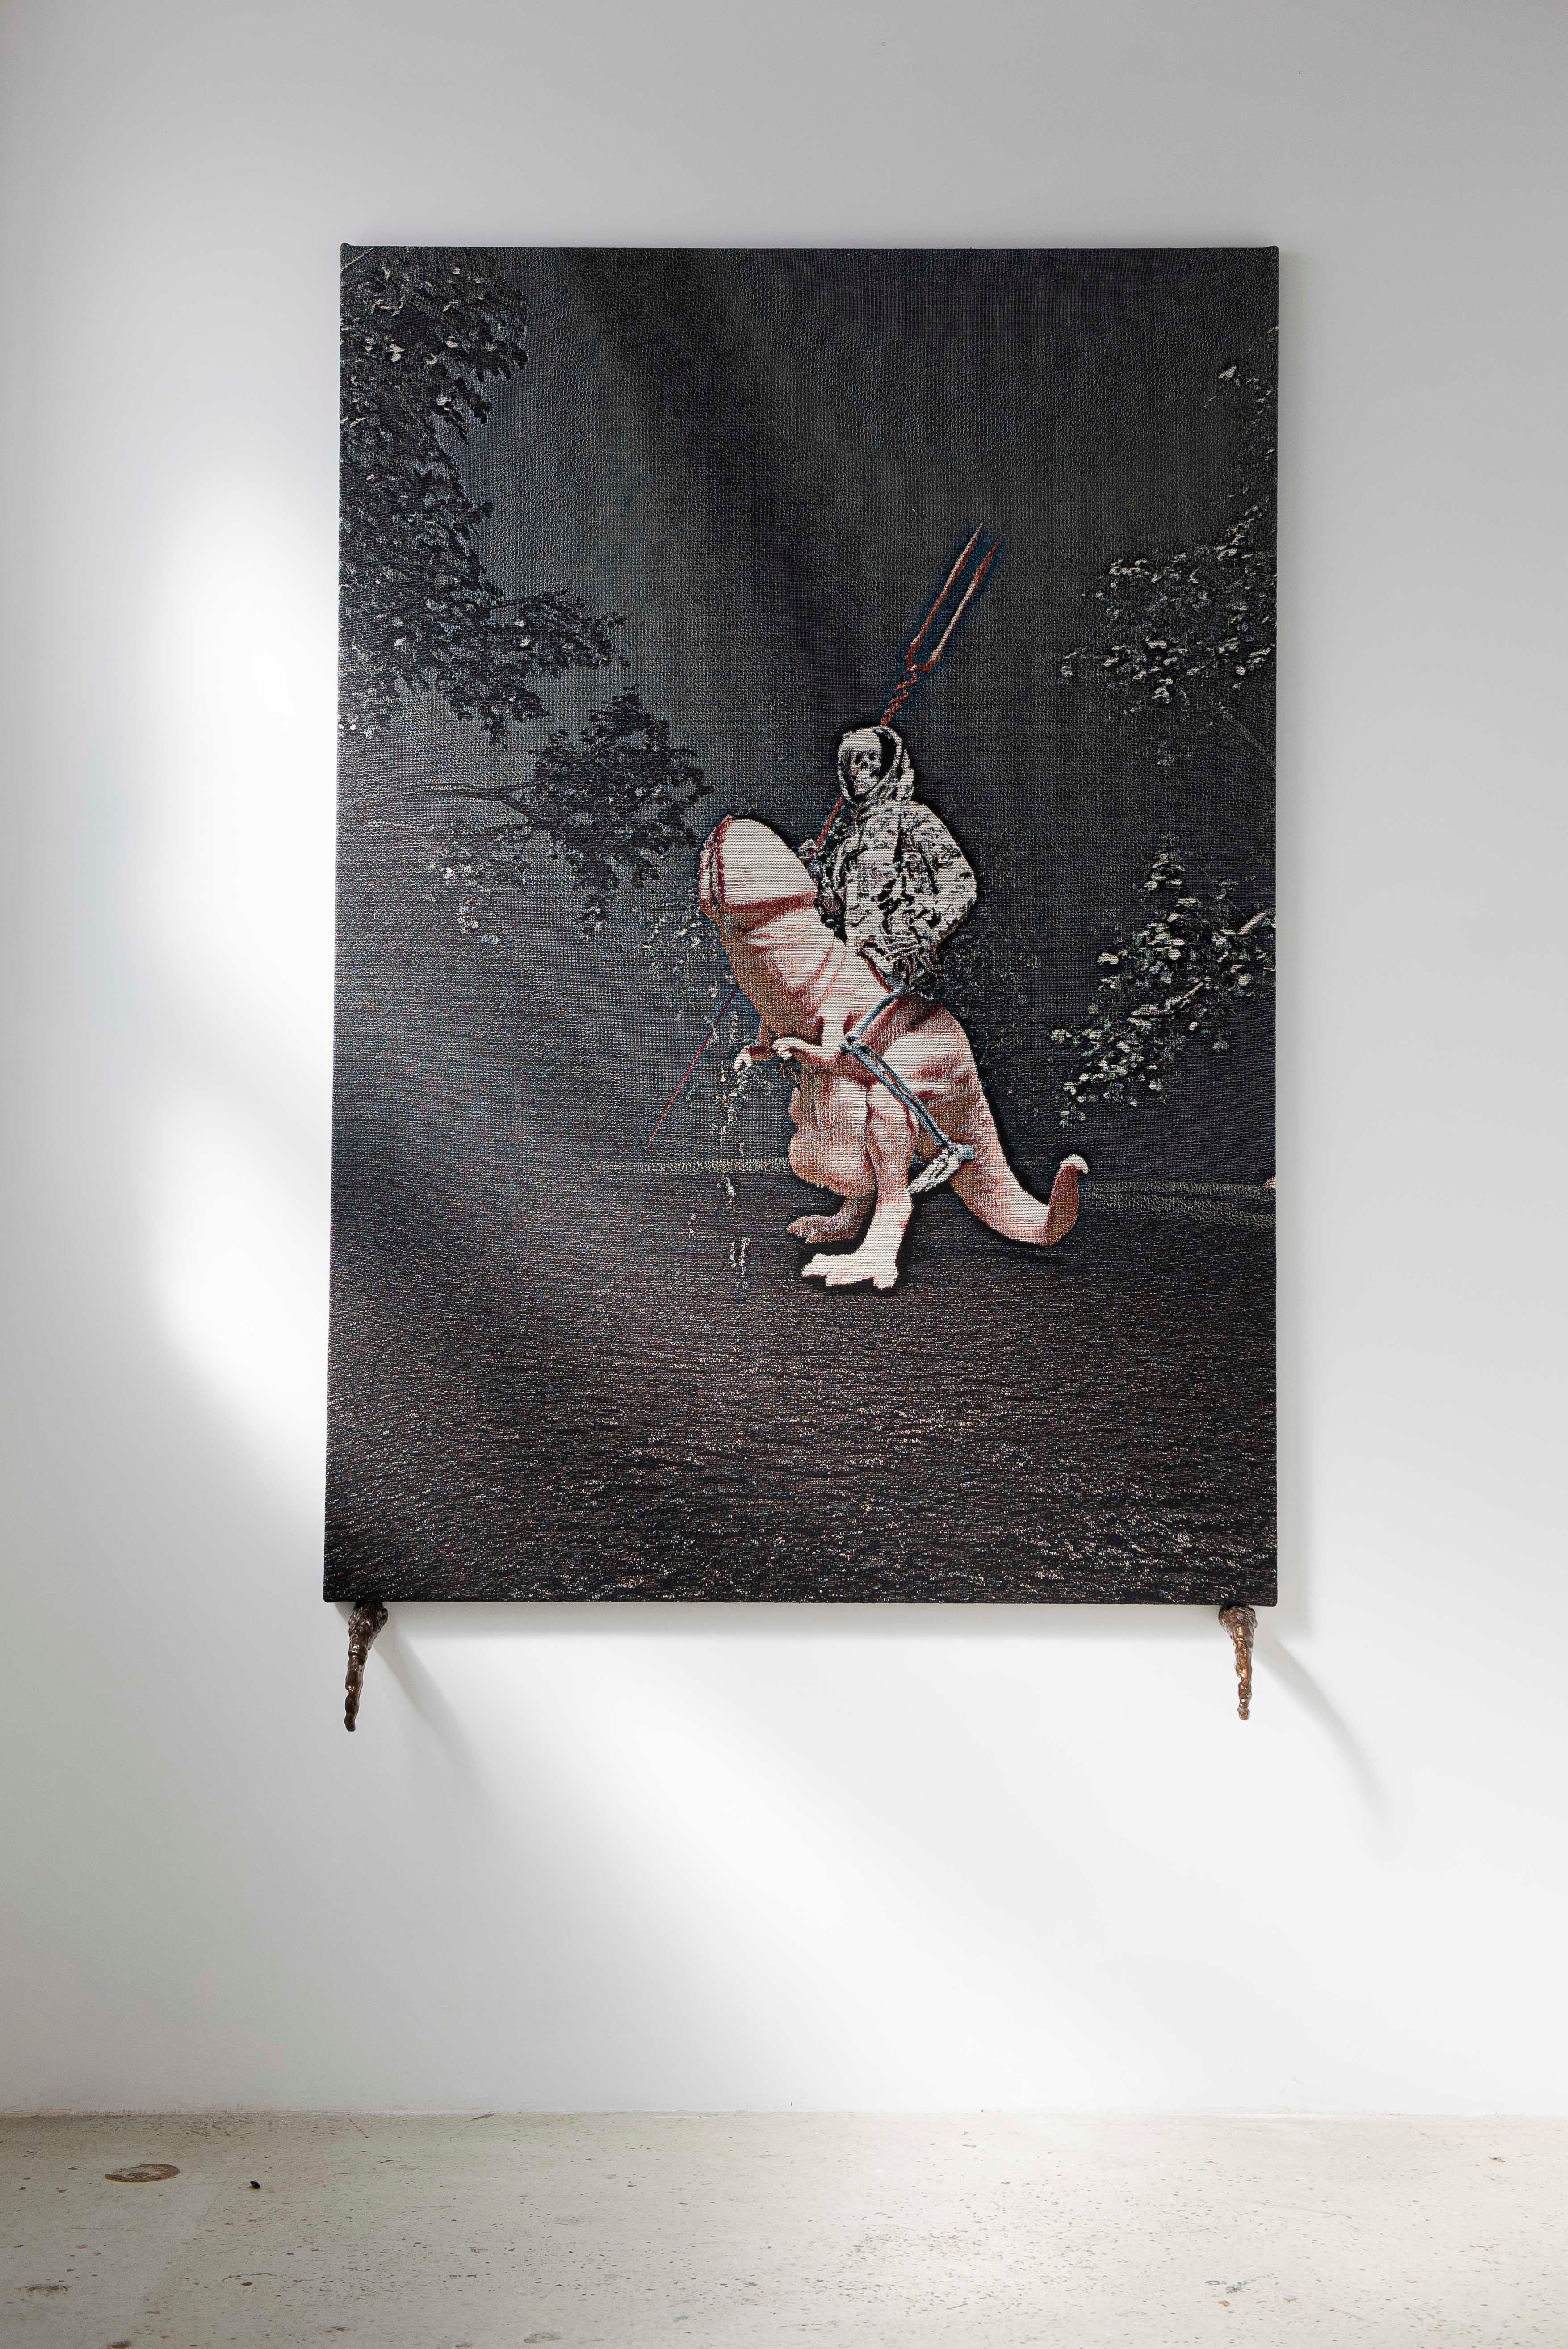 The Expulsion of Manna, 2021
jacquard woven tapestry, bronze, epoxy resin, 170 x 150cm